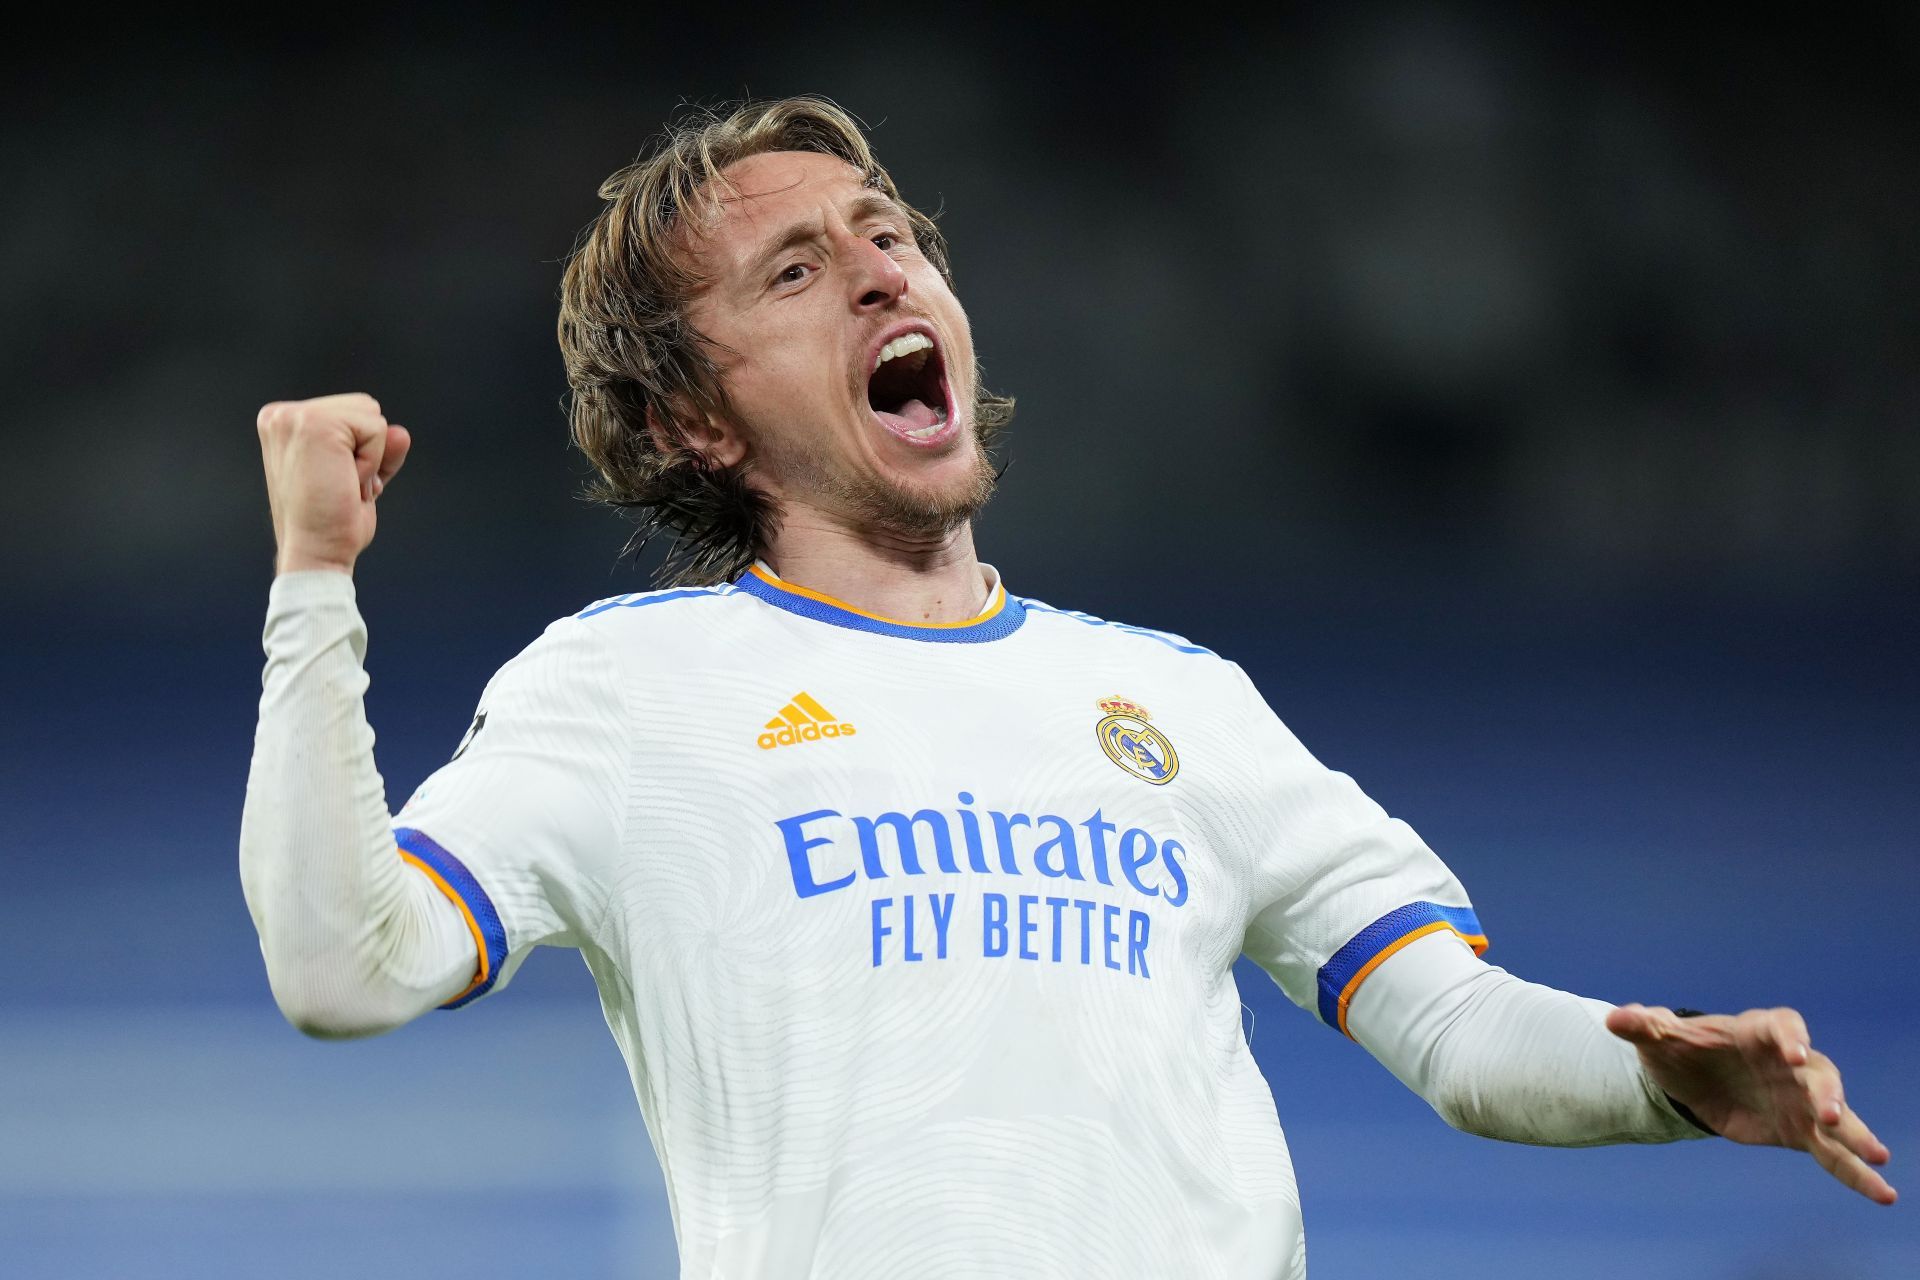 Modric is one of the greatest Real Madrid players of all time